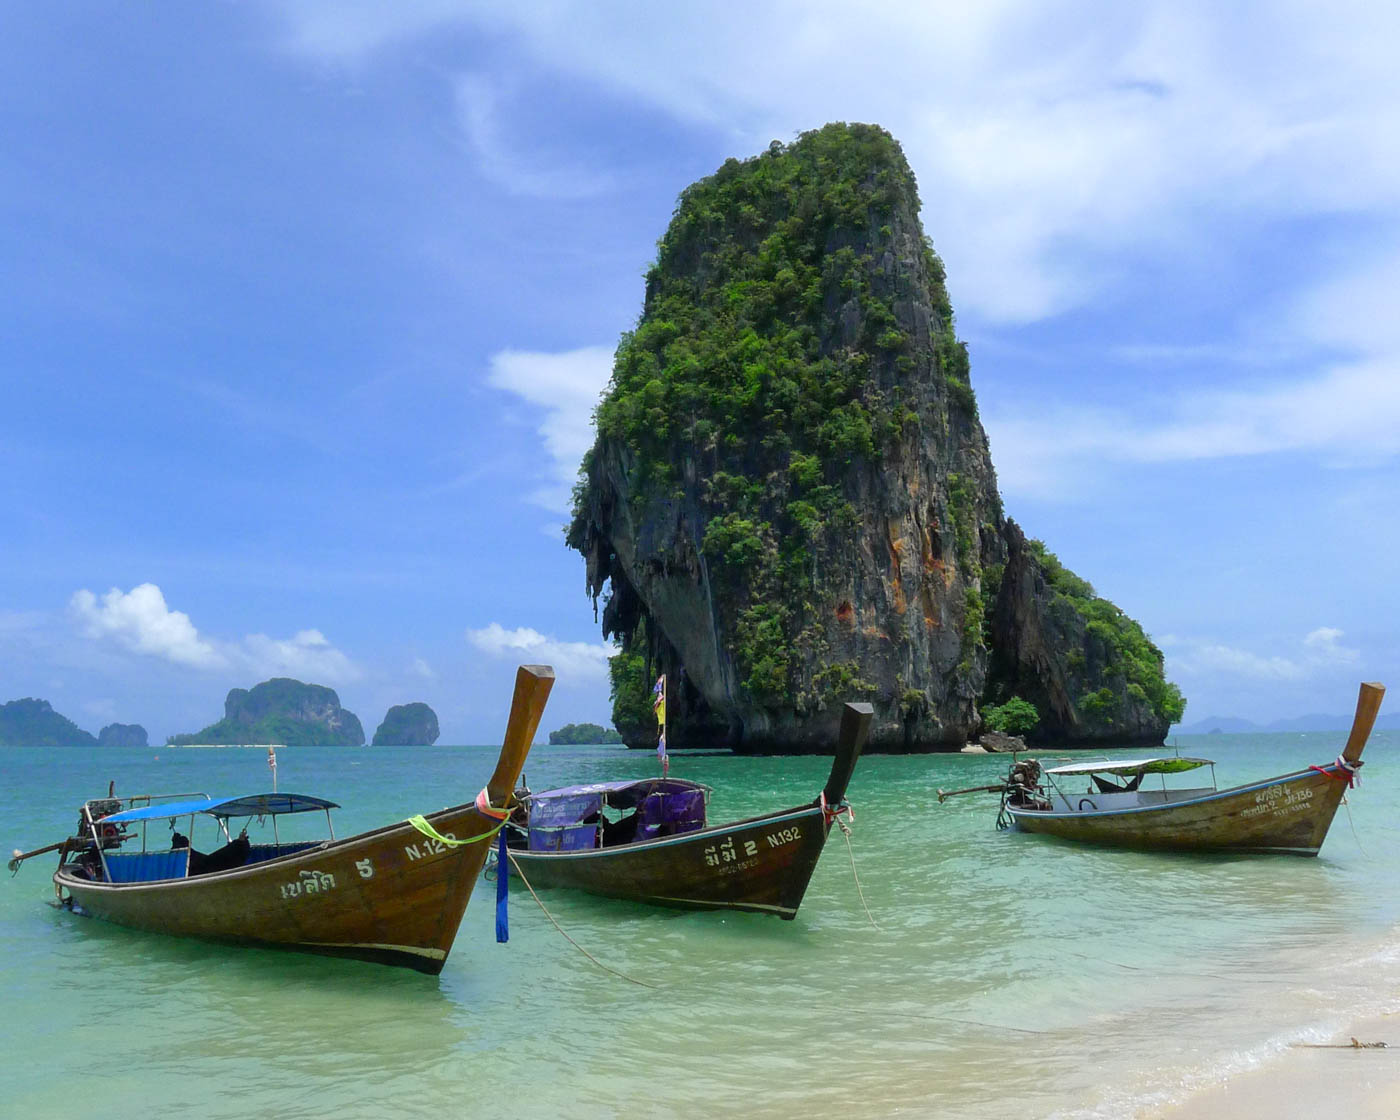 Limestone karsts and longtail boats on famous Phra Nang Beach in Krabi province, Thailand